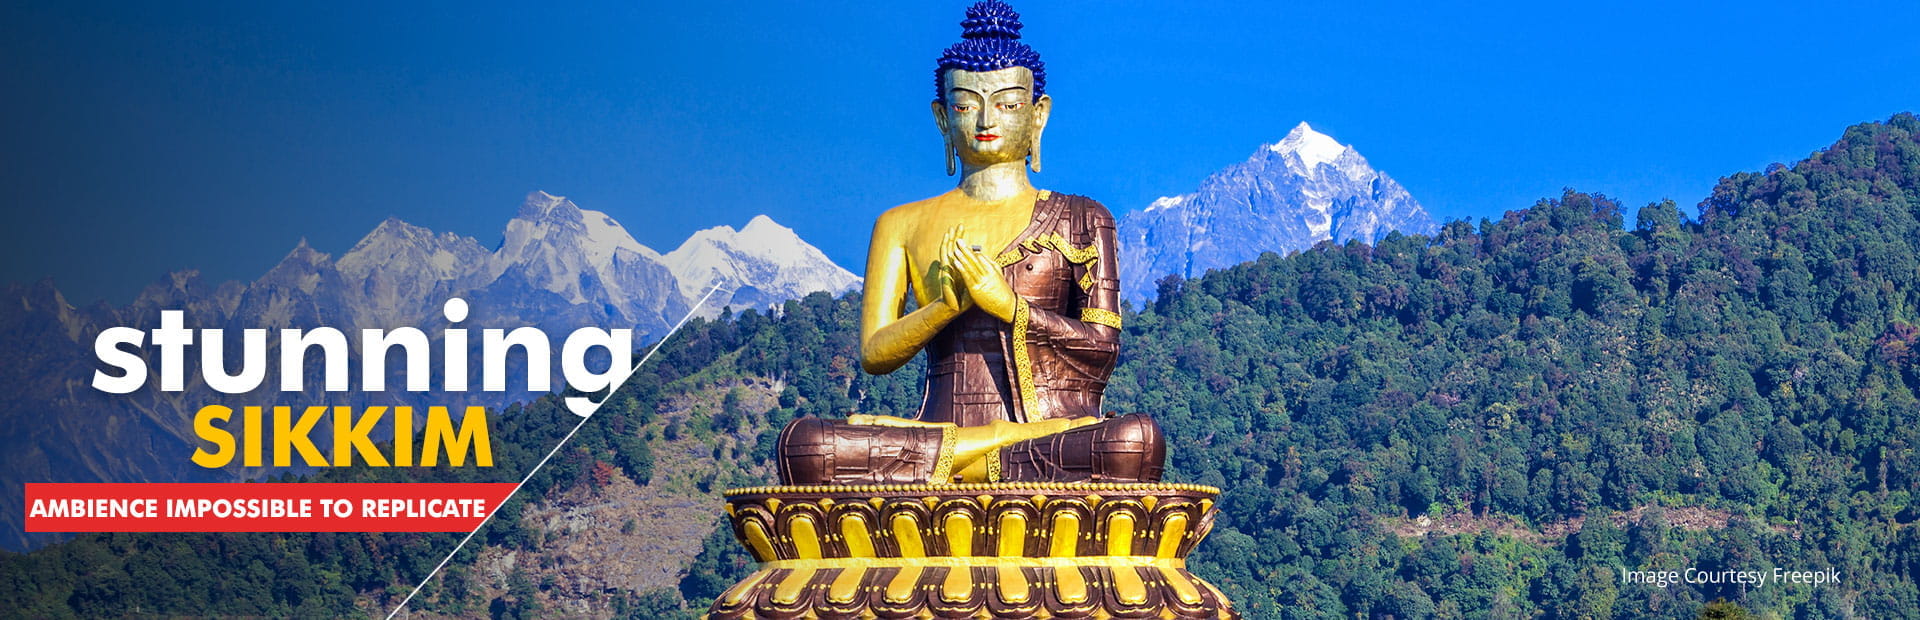 Sikkim Tours & Travel - RS Travels